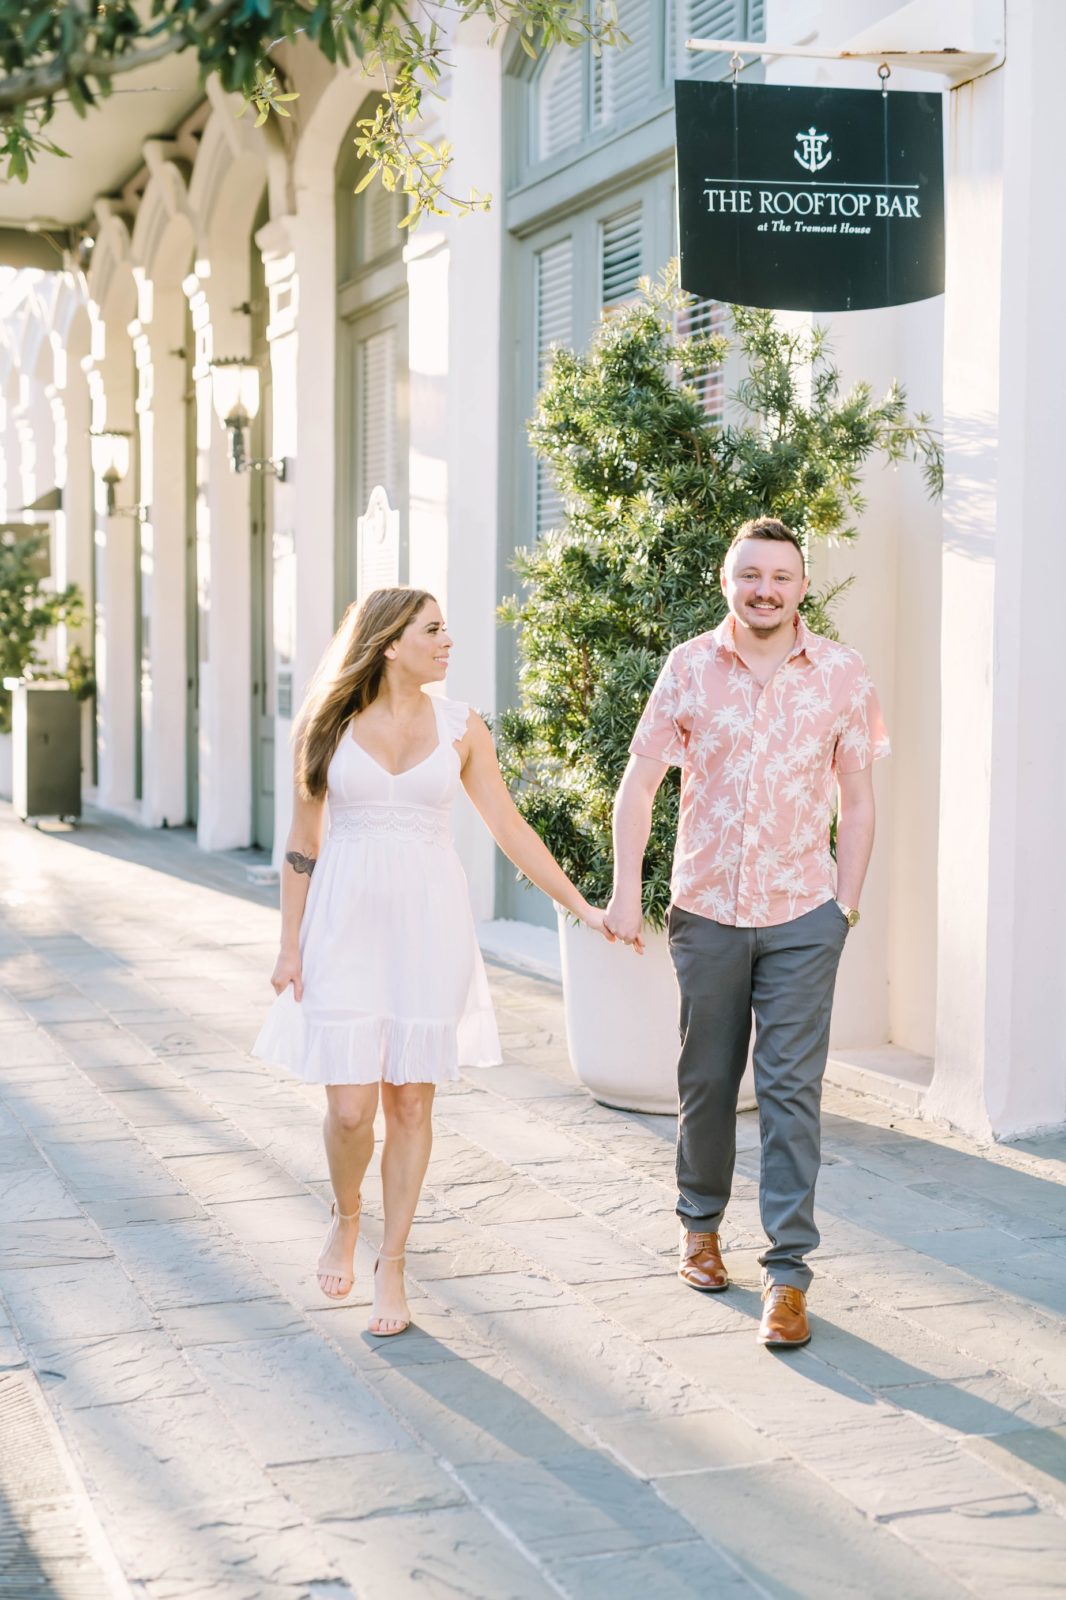 Holding hands walking down the street an engaged couple looks lovingly at one another by Christina Elliott Photography. summer Texas engagements #ChristinaElliottPhotography #ChristinaElliottEngagements #TheTremontHouse #Texasengagements #shesaidyes